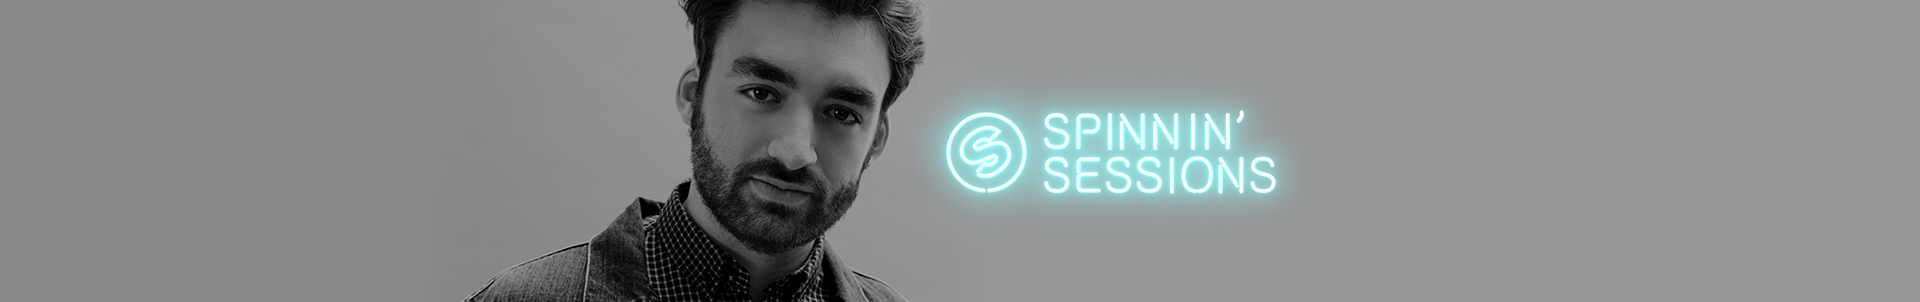 We Rave You premiere: Spinnin’ Sessions Radio Show with a guest mix by Oliver Heldens